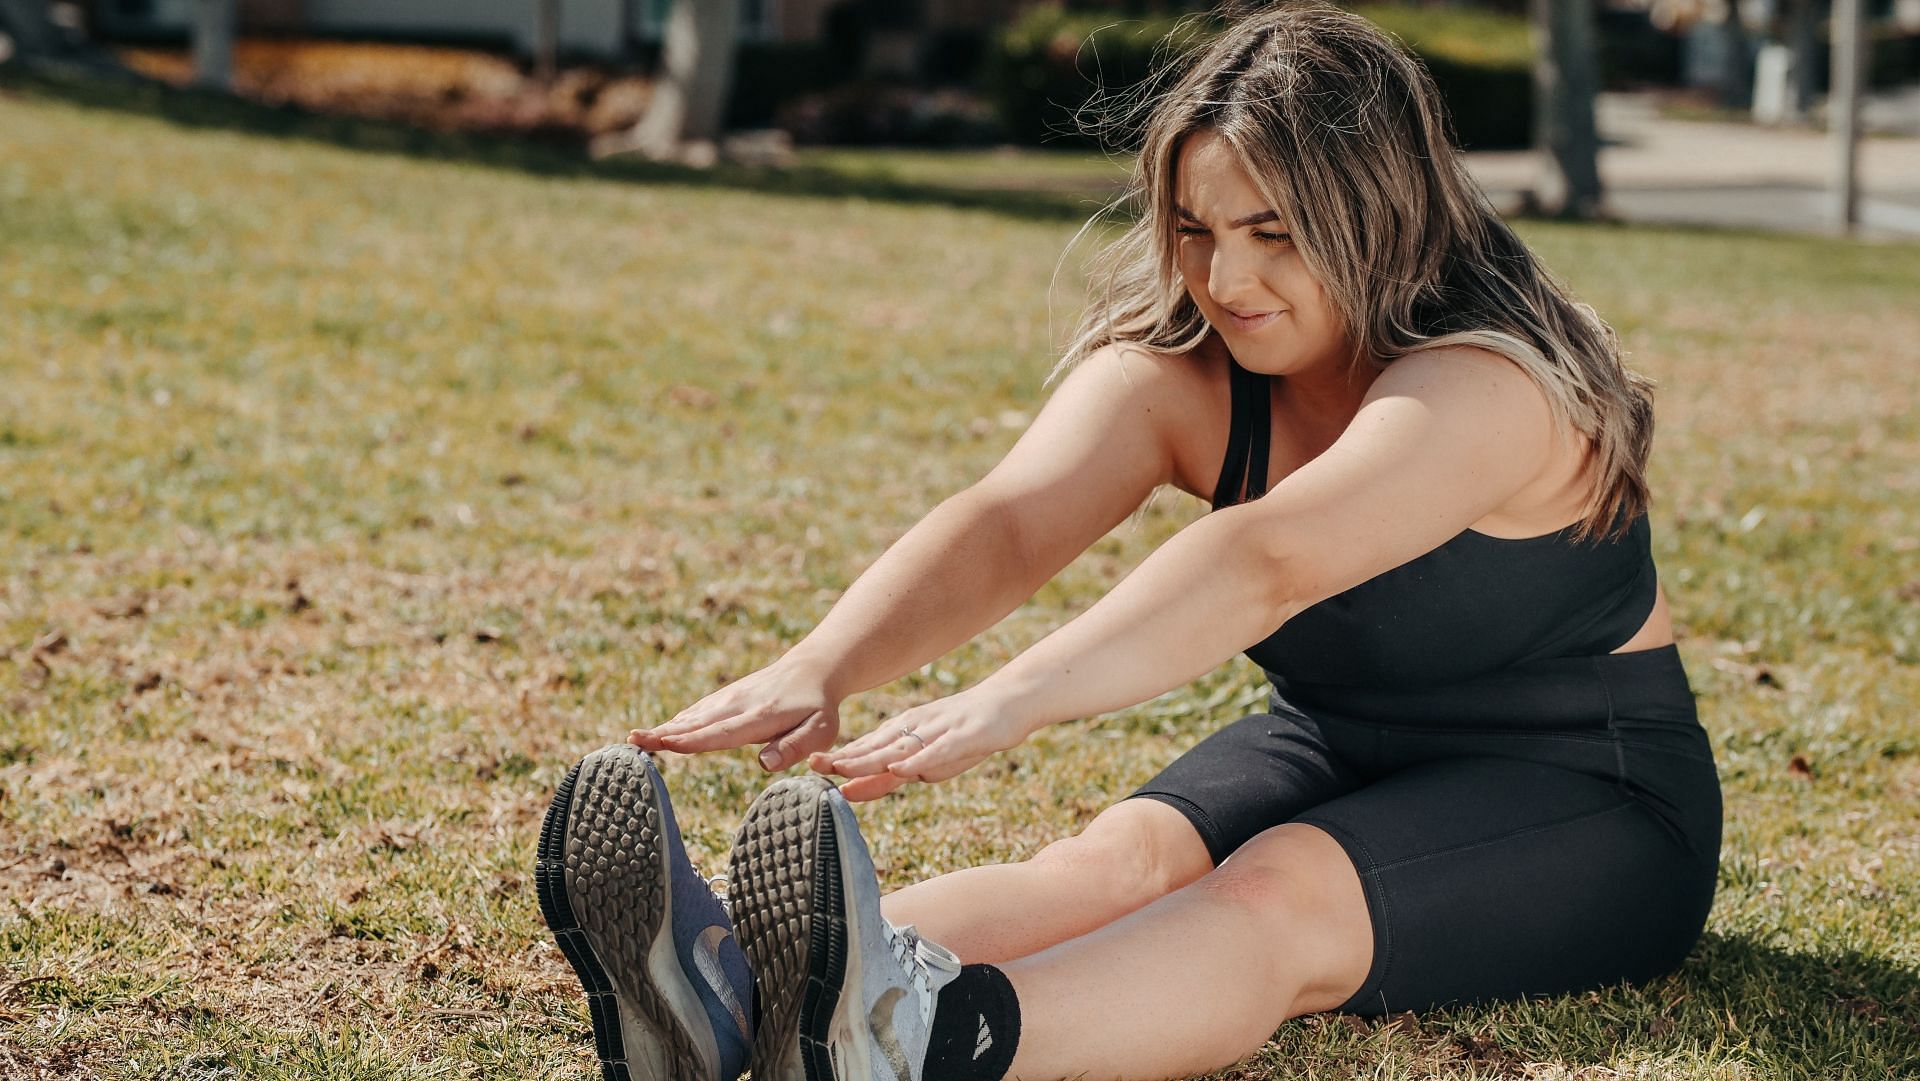 Post-workout essentials include stretching as it helps in recovery. (Image via Pexels/ Kindel Media)